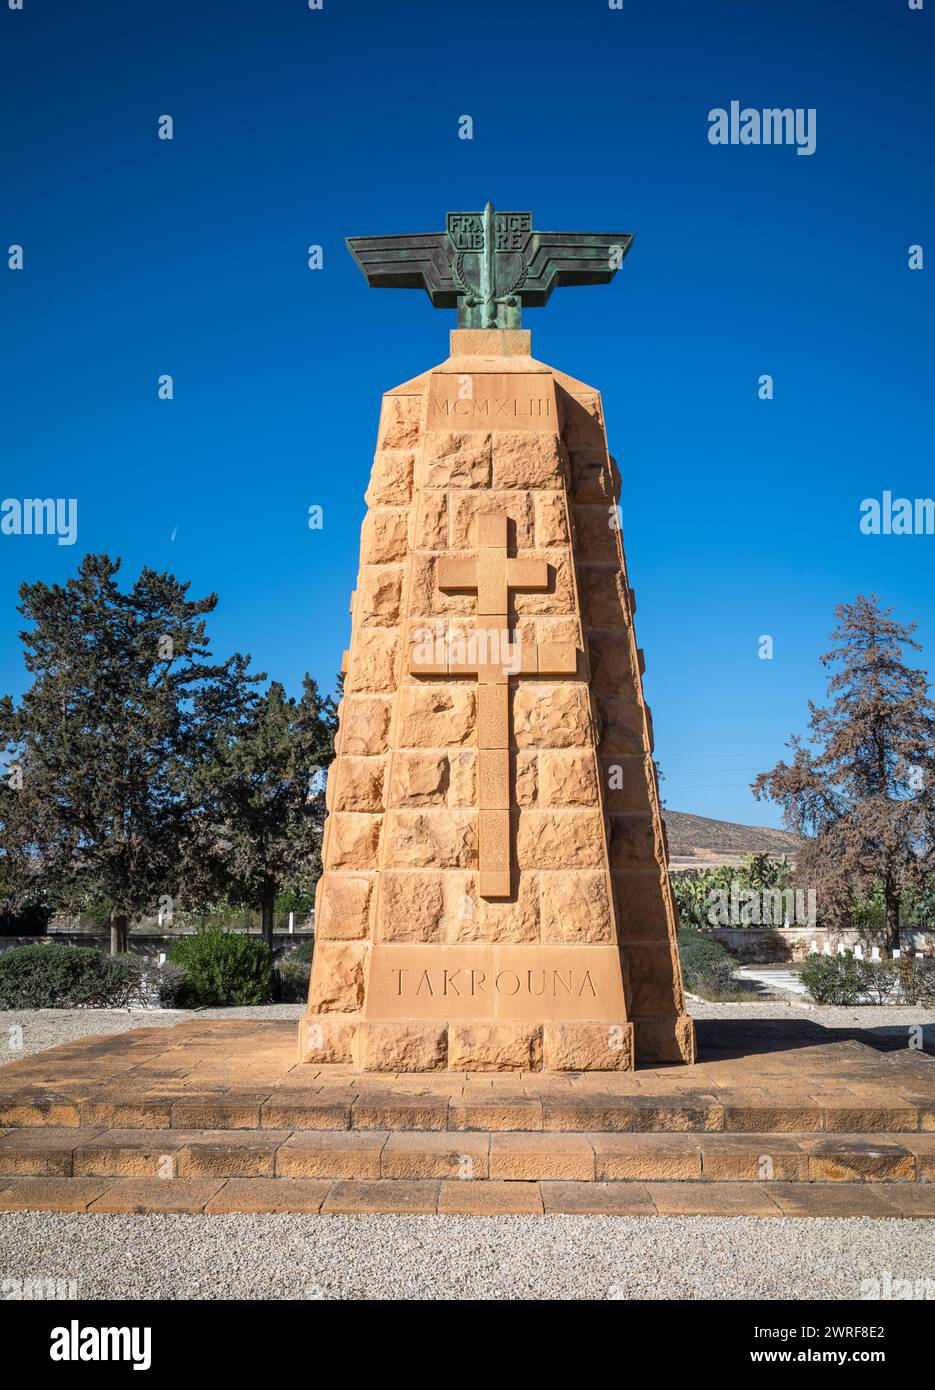 The main obelisk memorial at the WW2 French Military Cemetery in Takrouna, Tunisia. Stock Photo